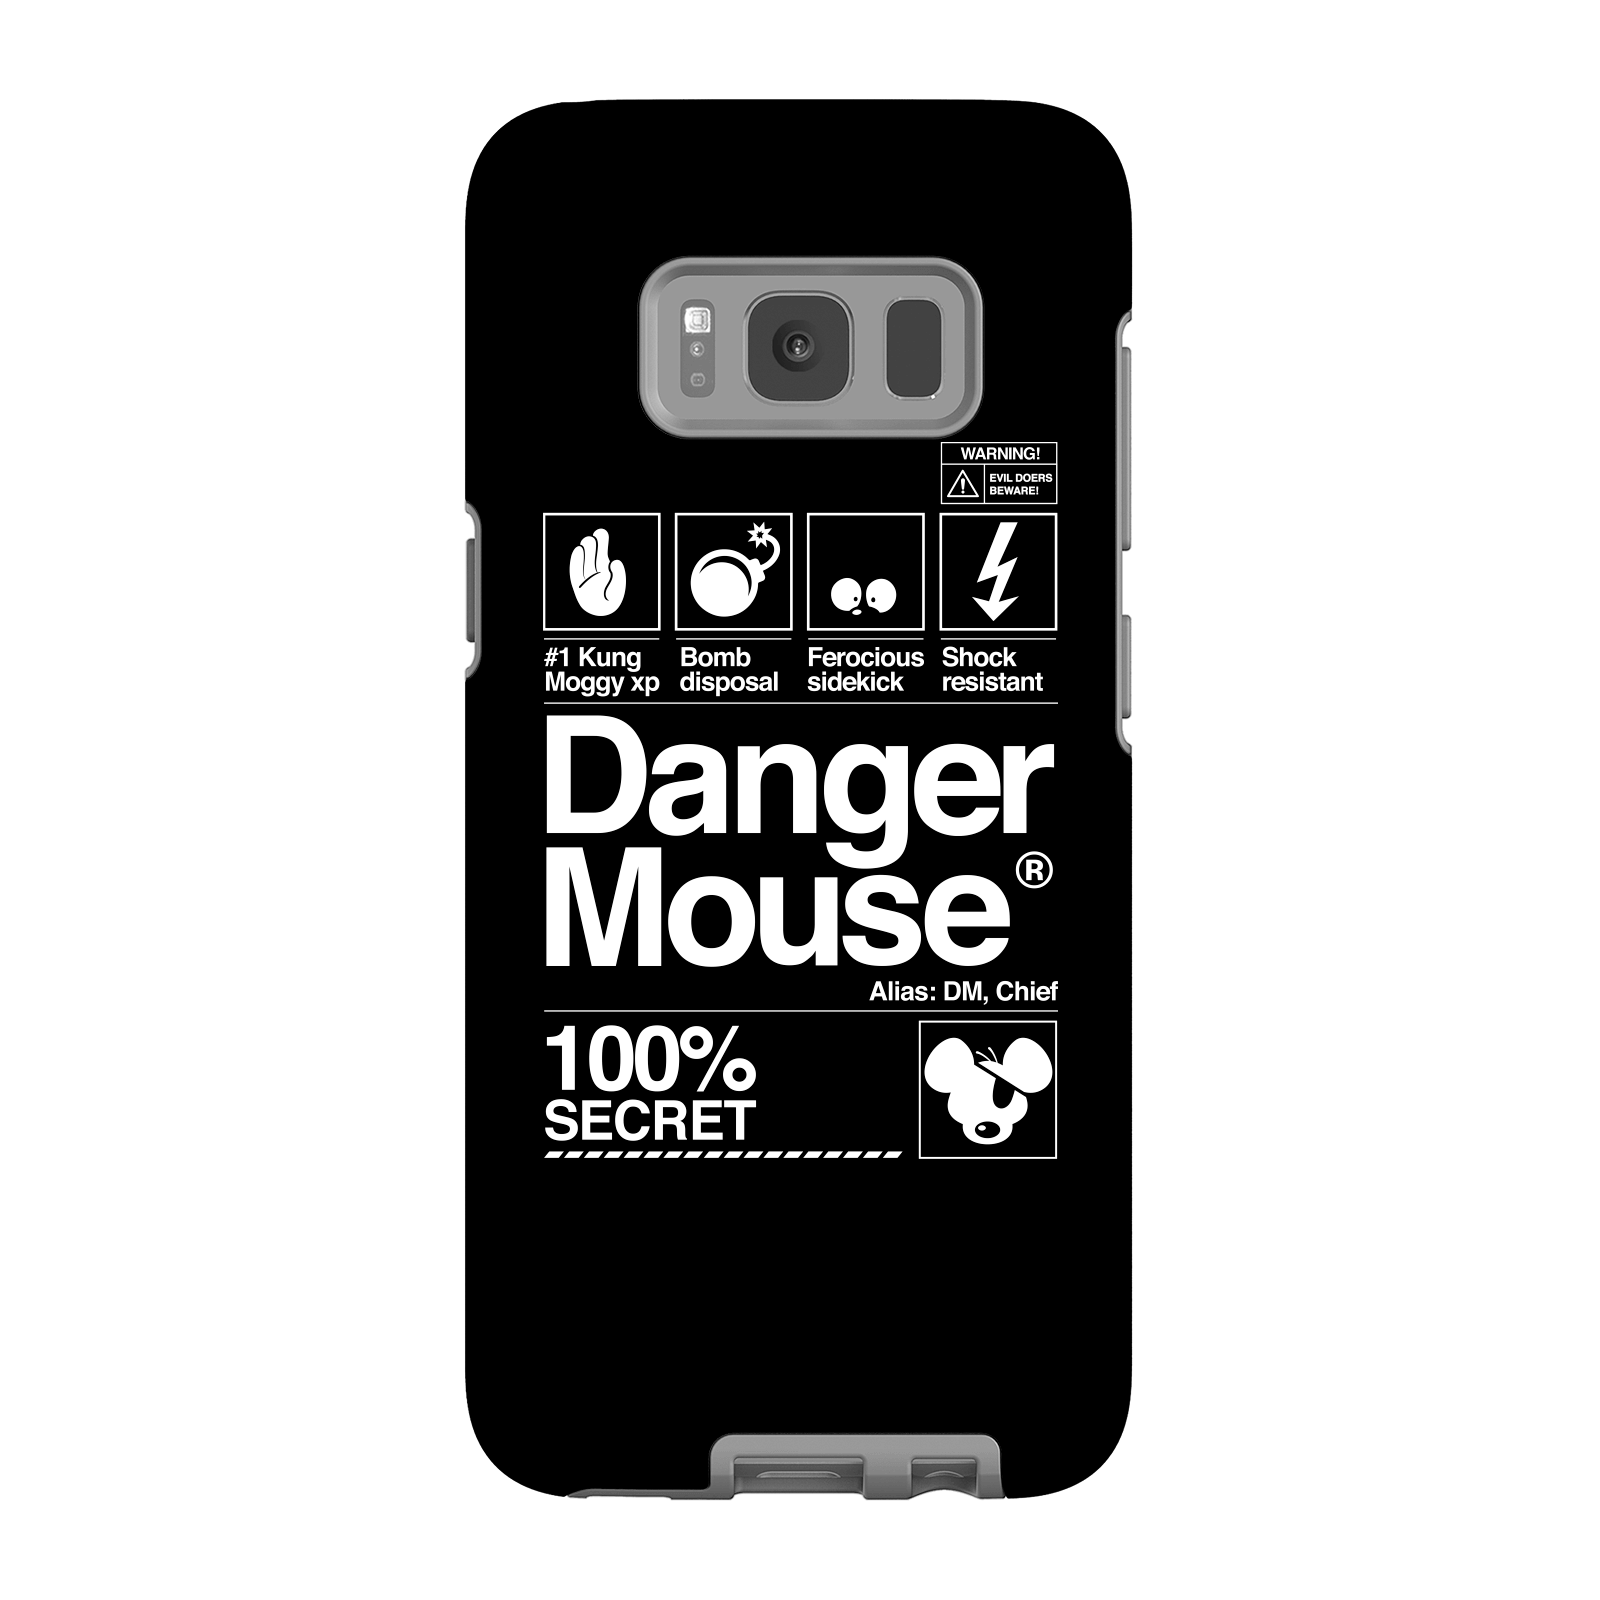 Danger Mouse 100% Secret Phone Case for iPhone and Android - Samsung S8 - Tough Case - Matte